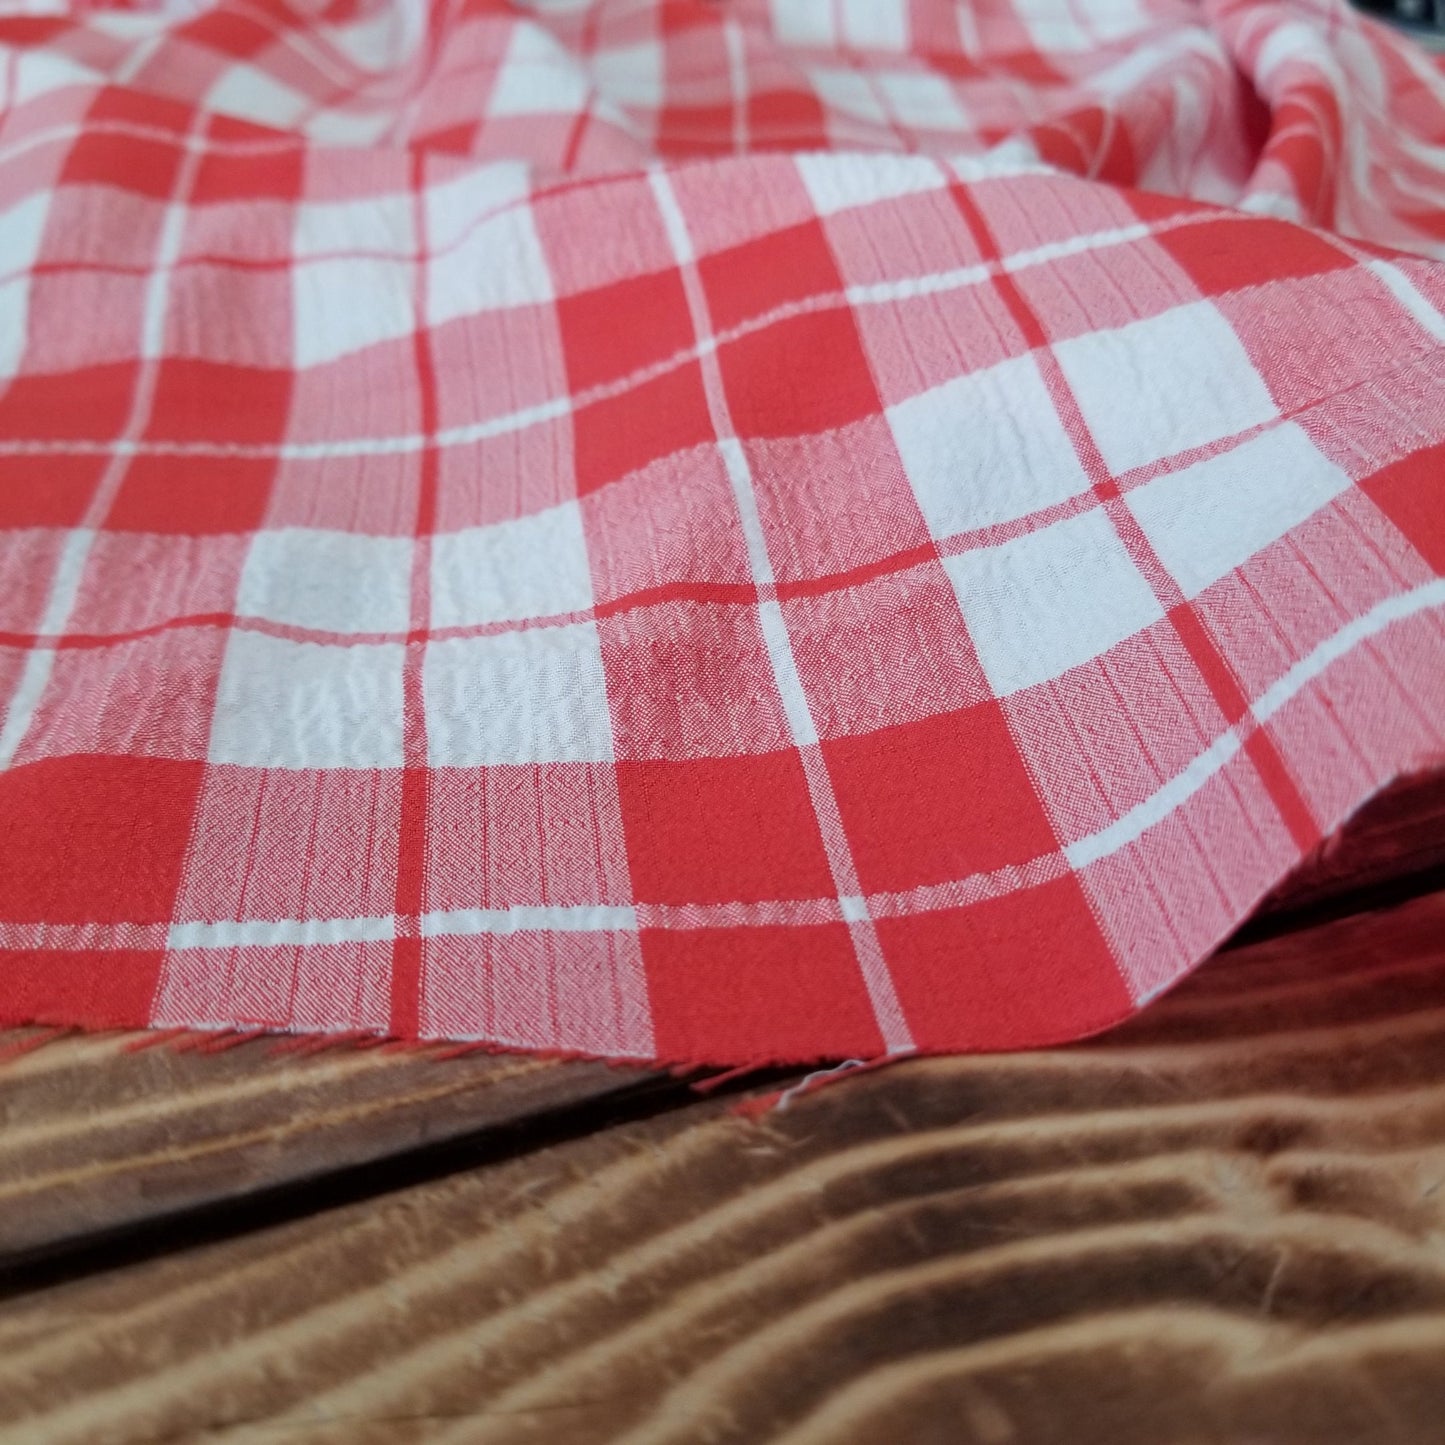 LA Finch 5 yard precuts: 5 yards of Designer Deadstock Apple Red Picnic Gingham White Textured Seersucker Poly Rayon Spandex Woven